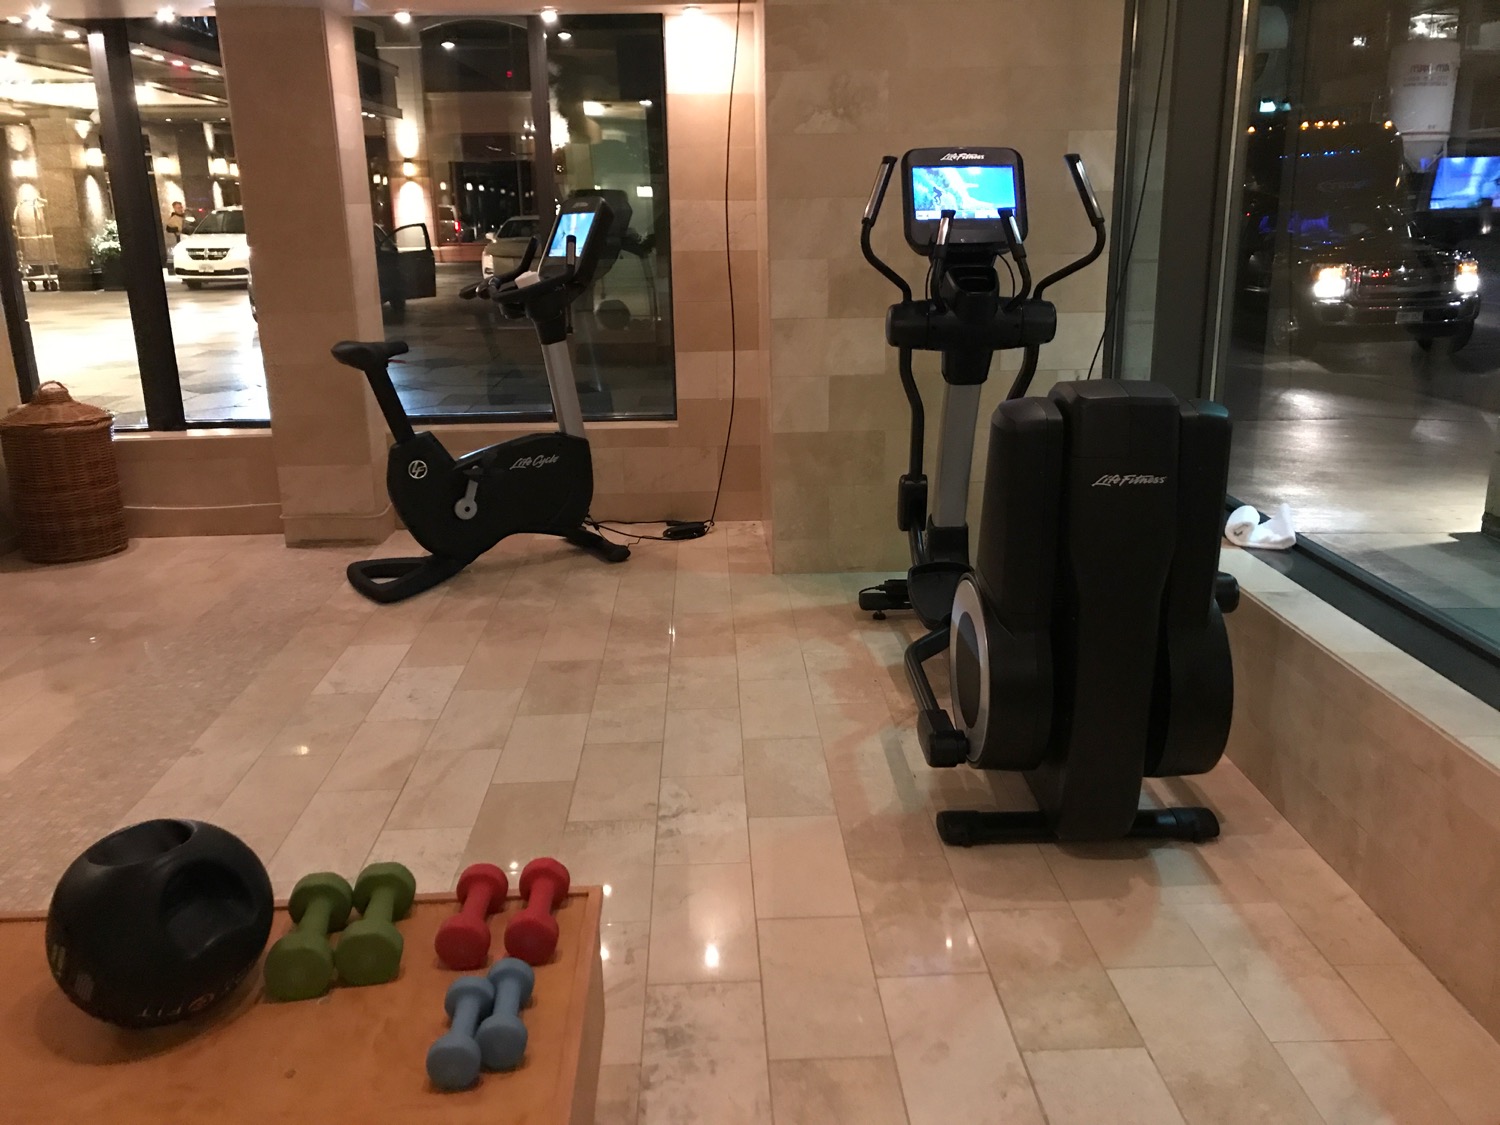 exercise machines in a room